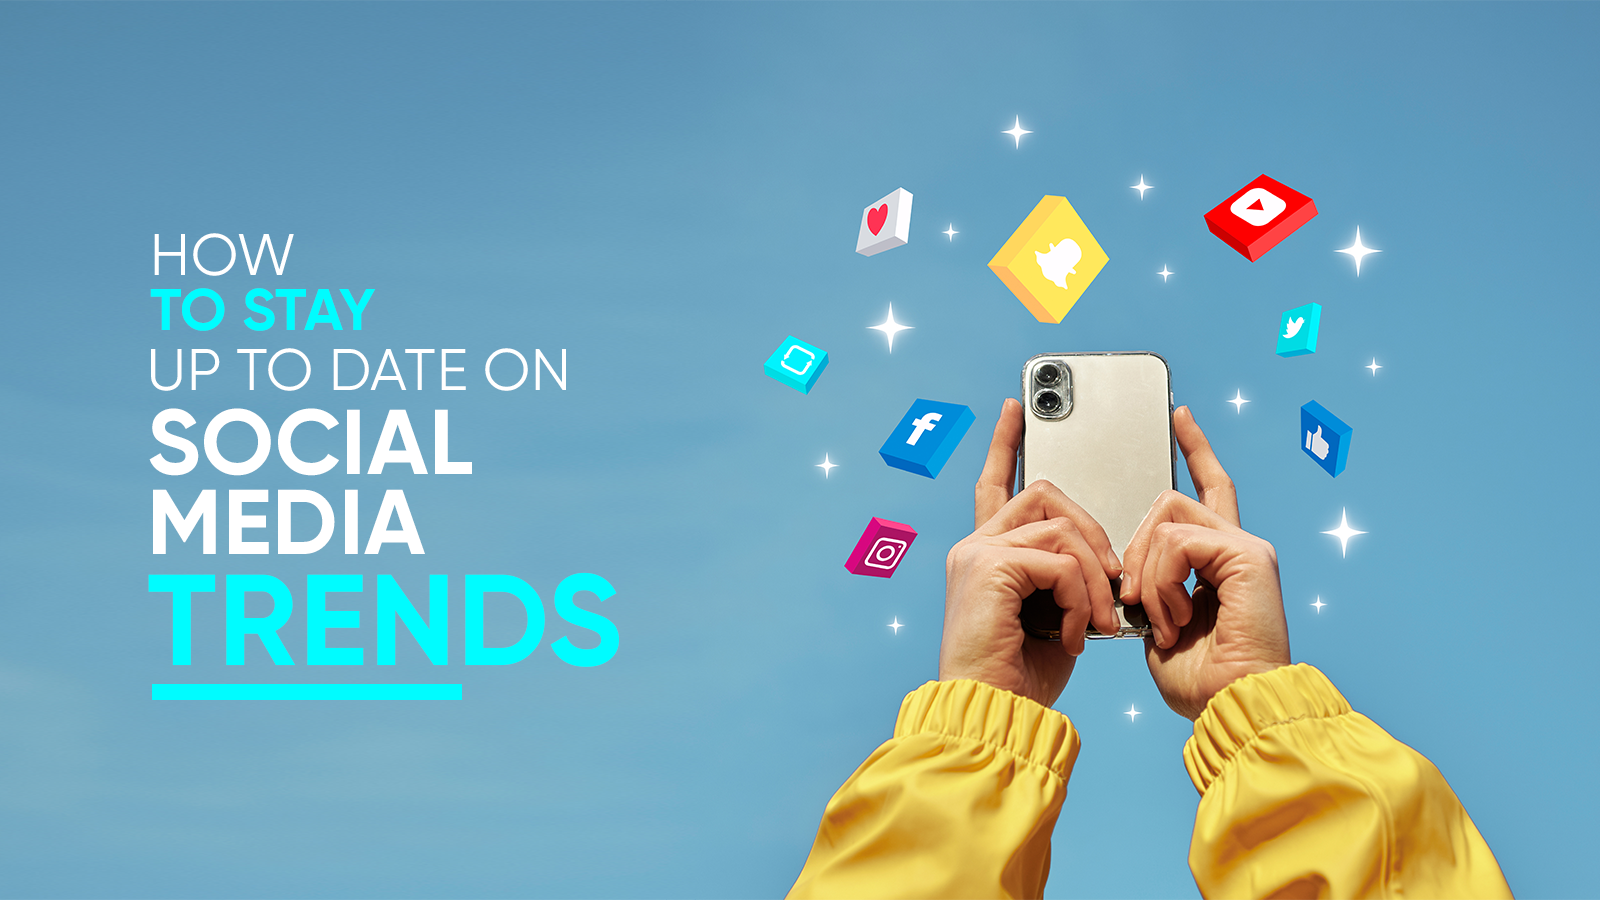 How To Stay Up To Date On Social Media Trends